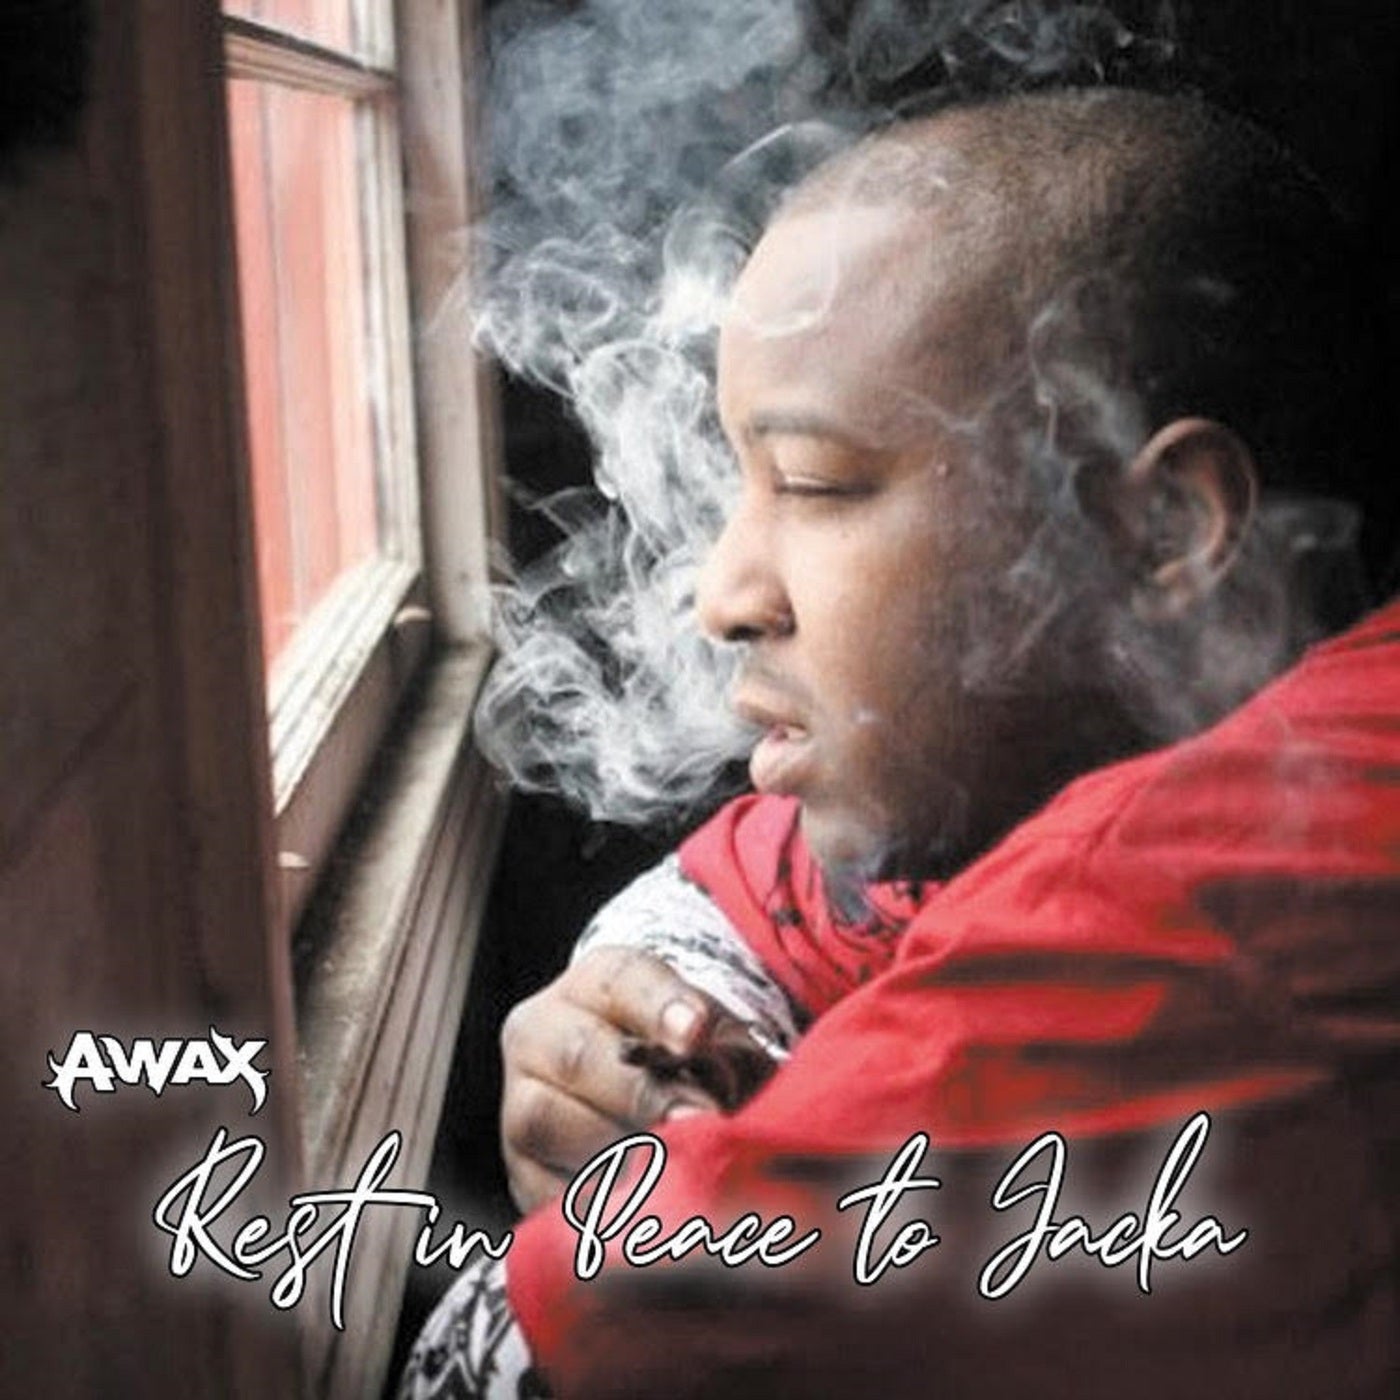 Rest In Peace to Jacka